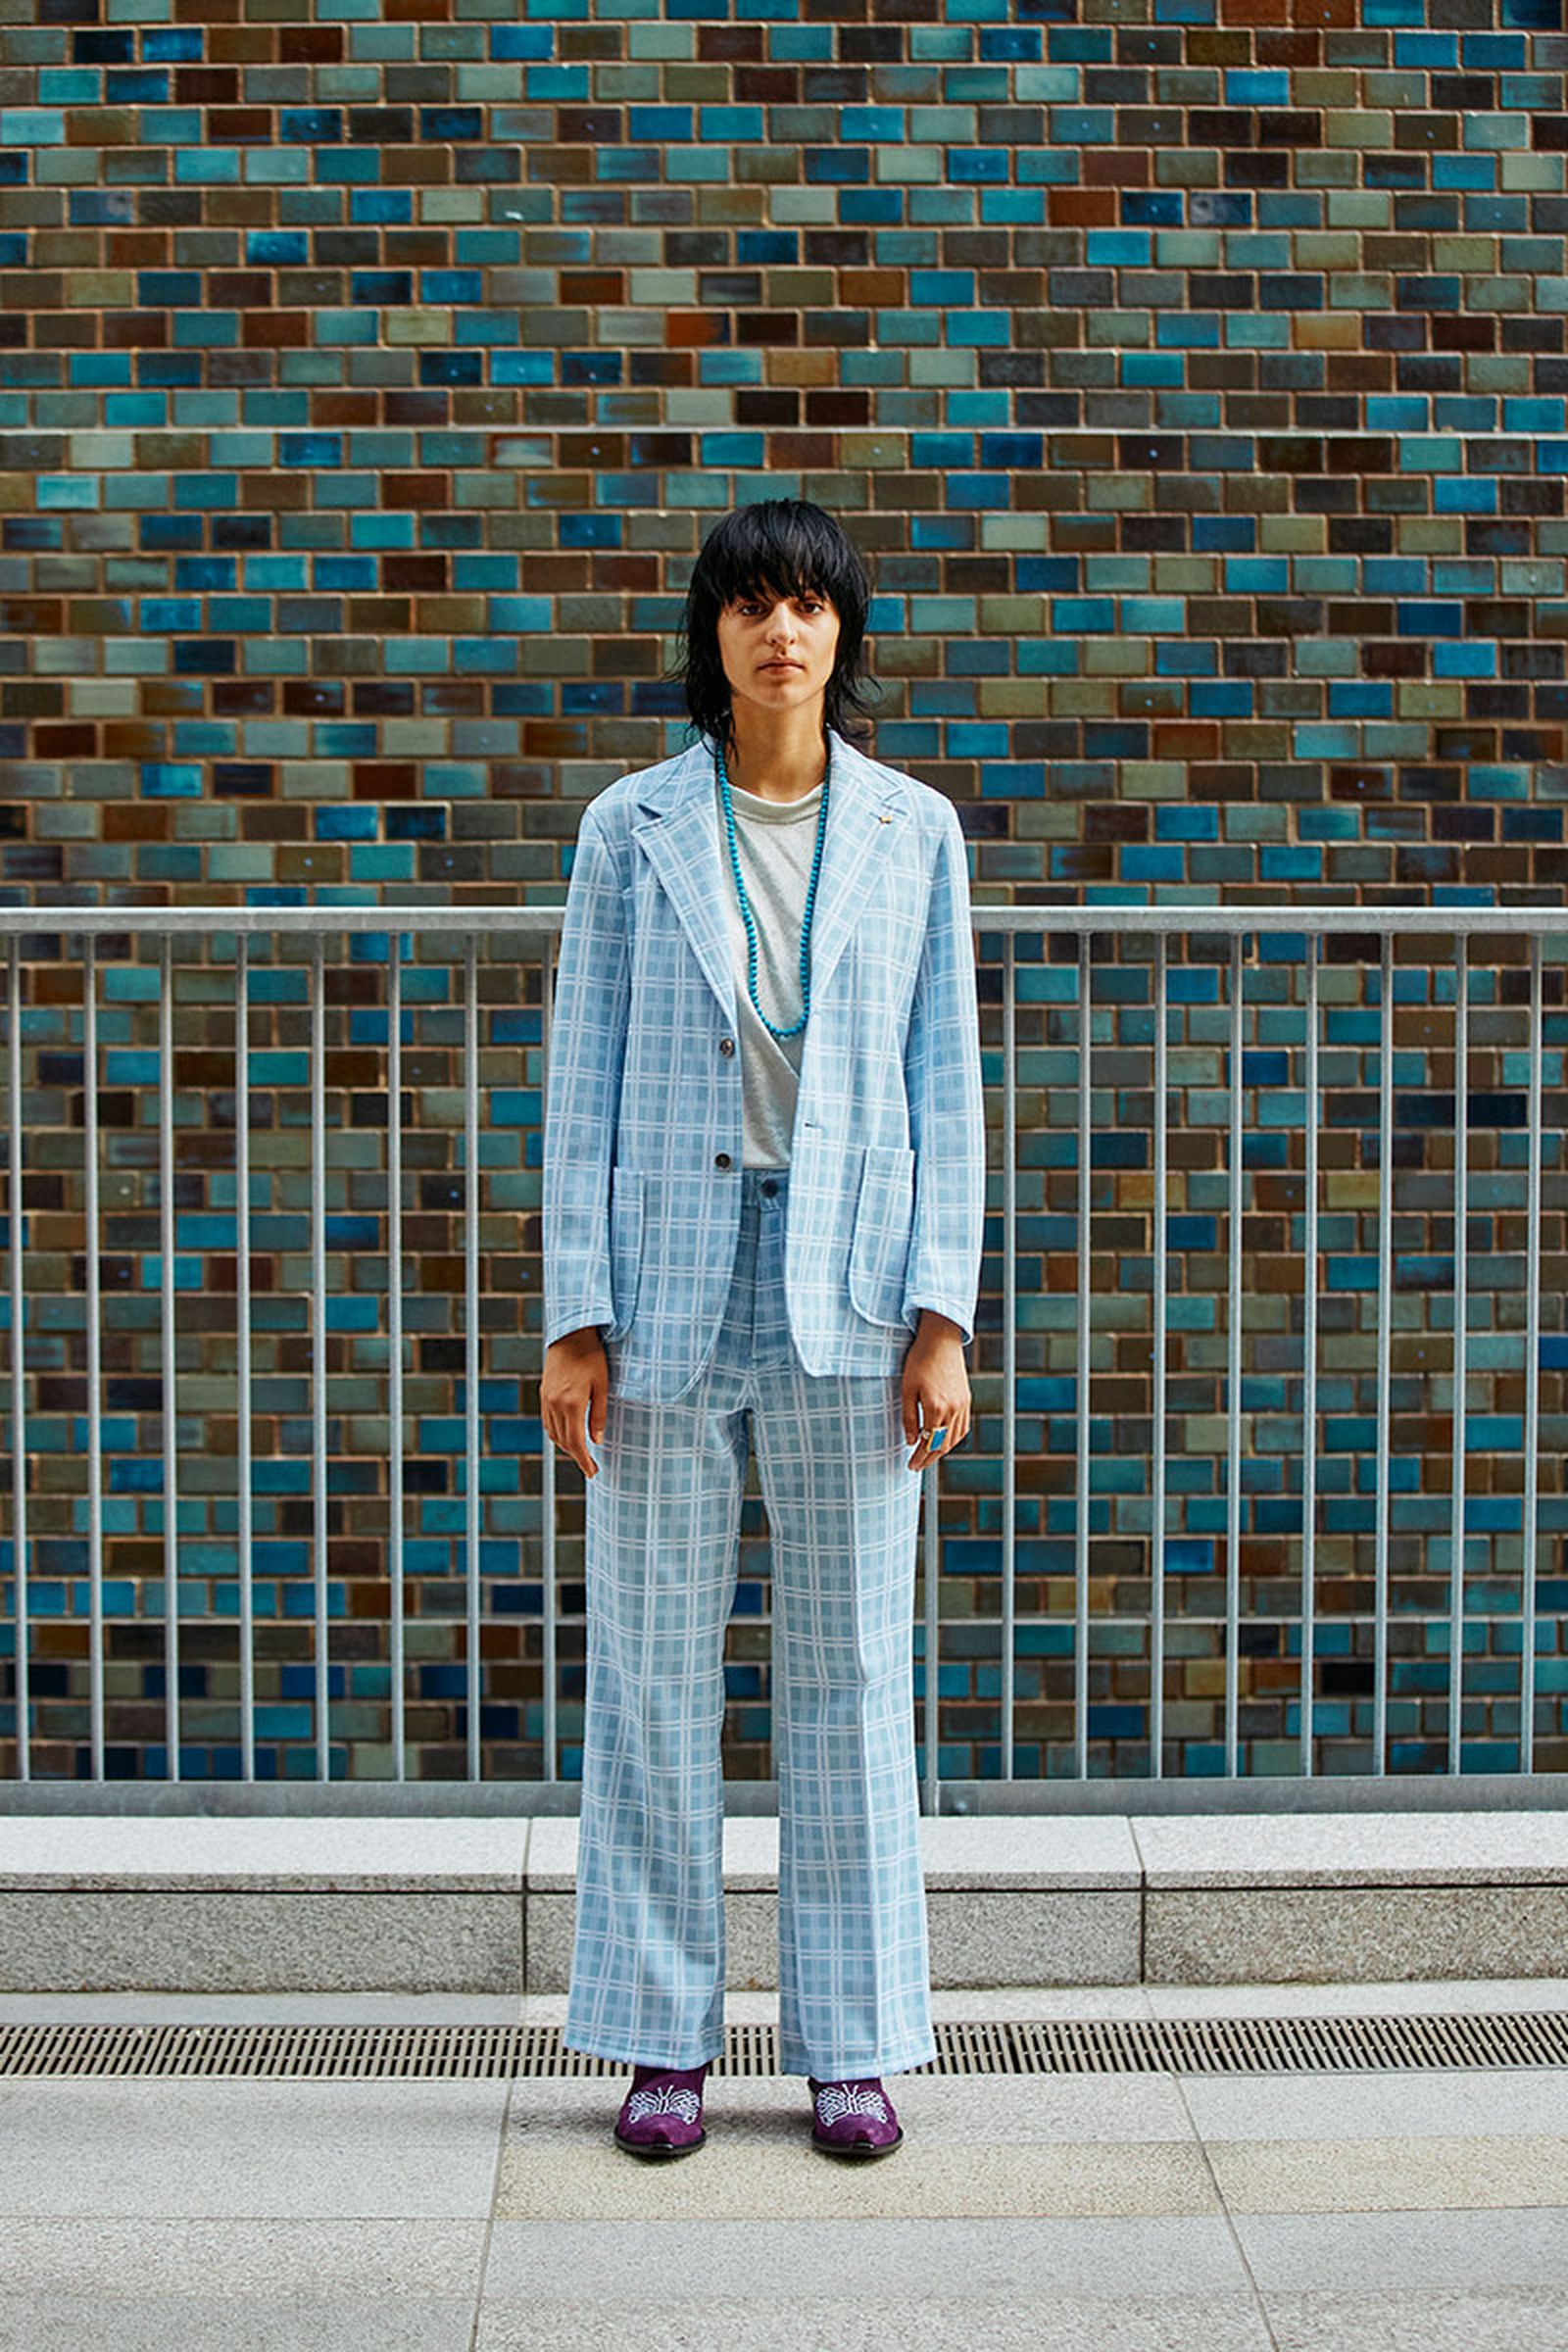 needles ss 20 lookbook nepenthes ss20